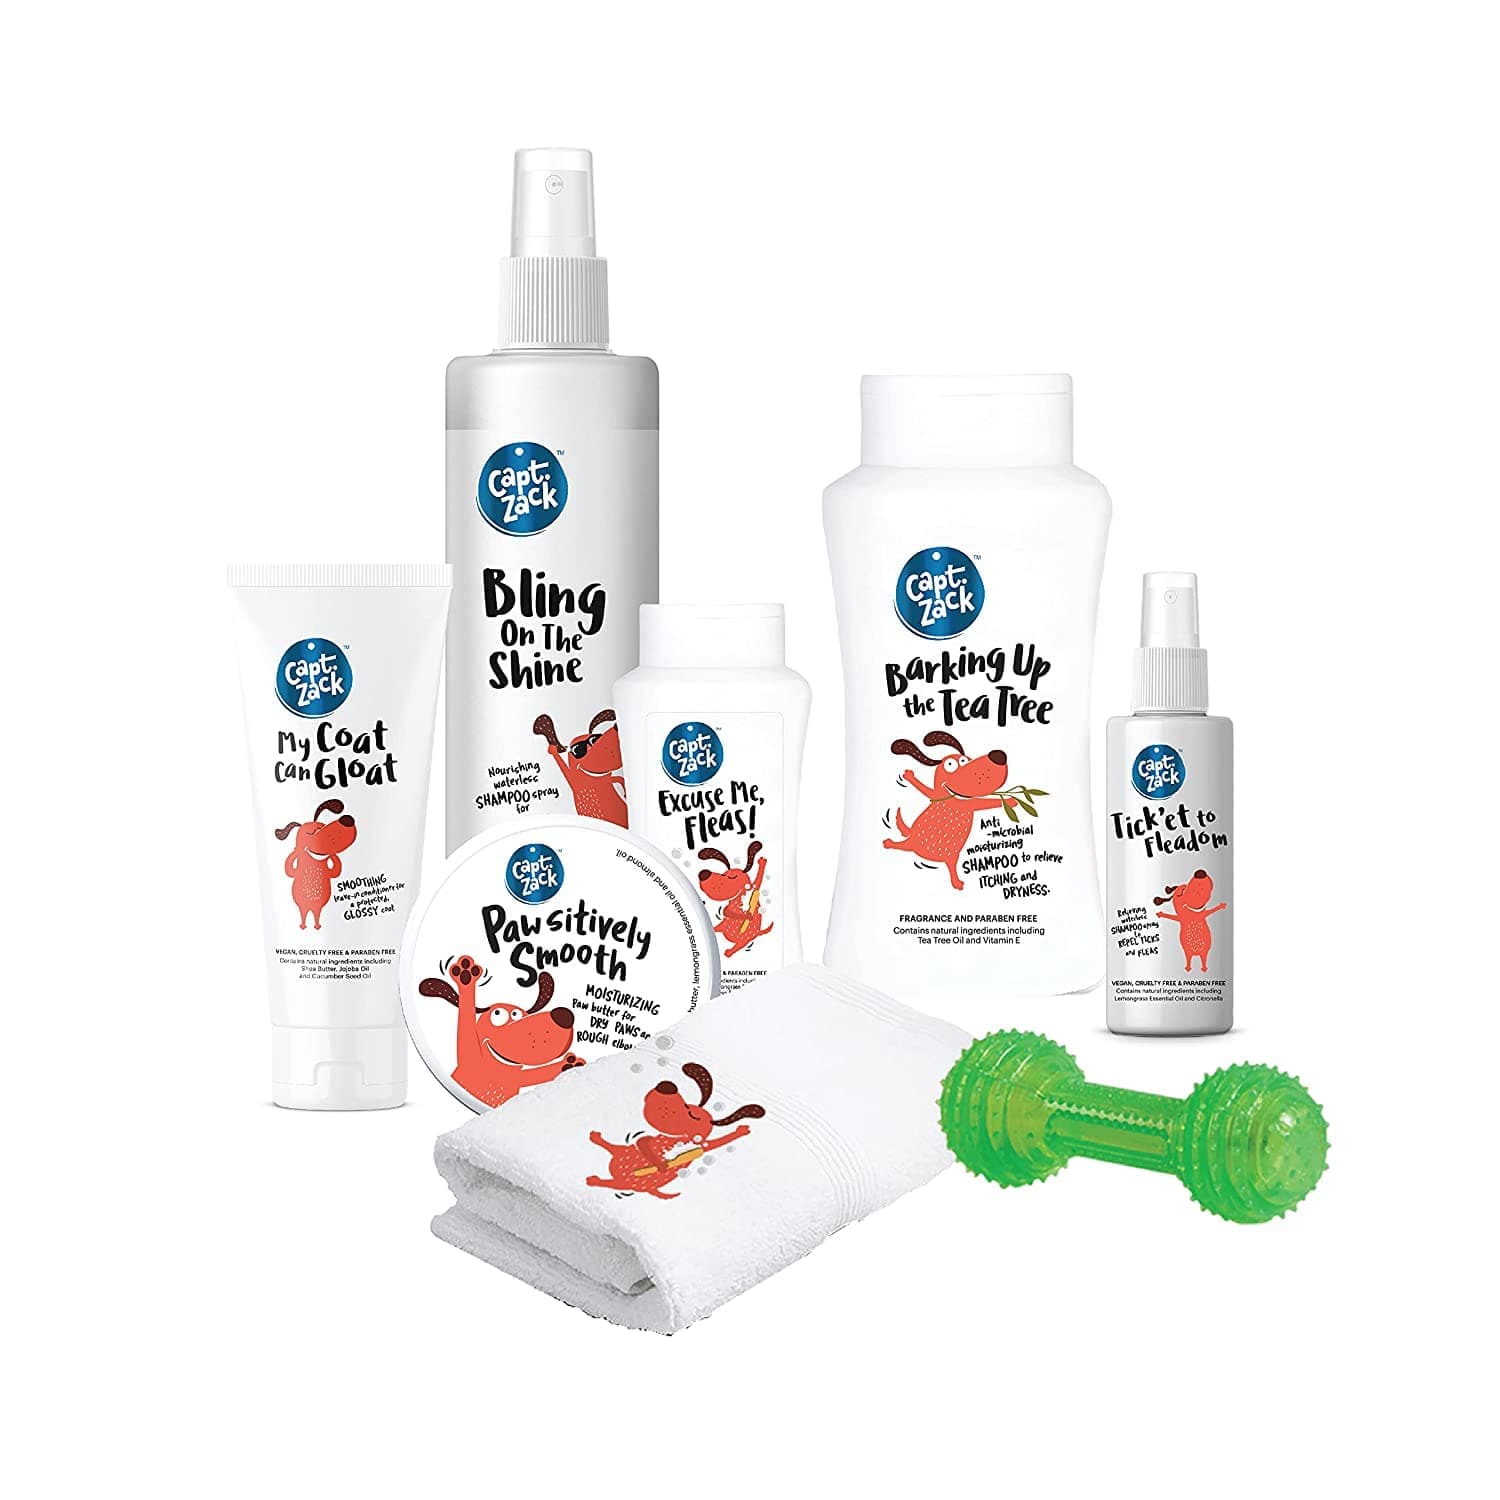 Captain Zack The Indian Pariah Groom Box for Dogs